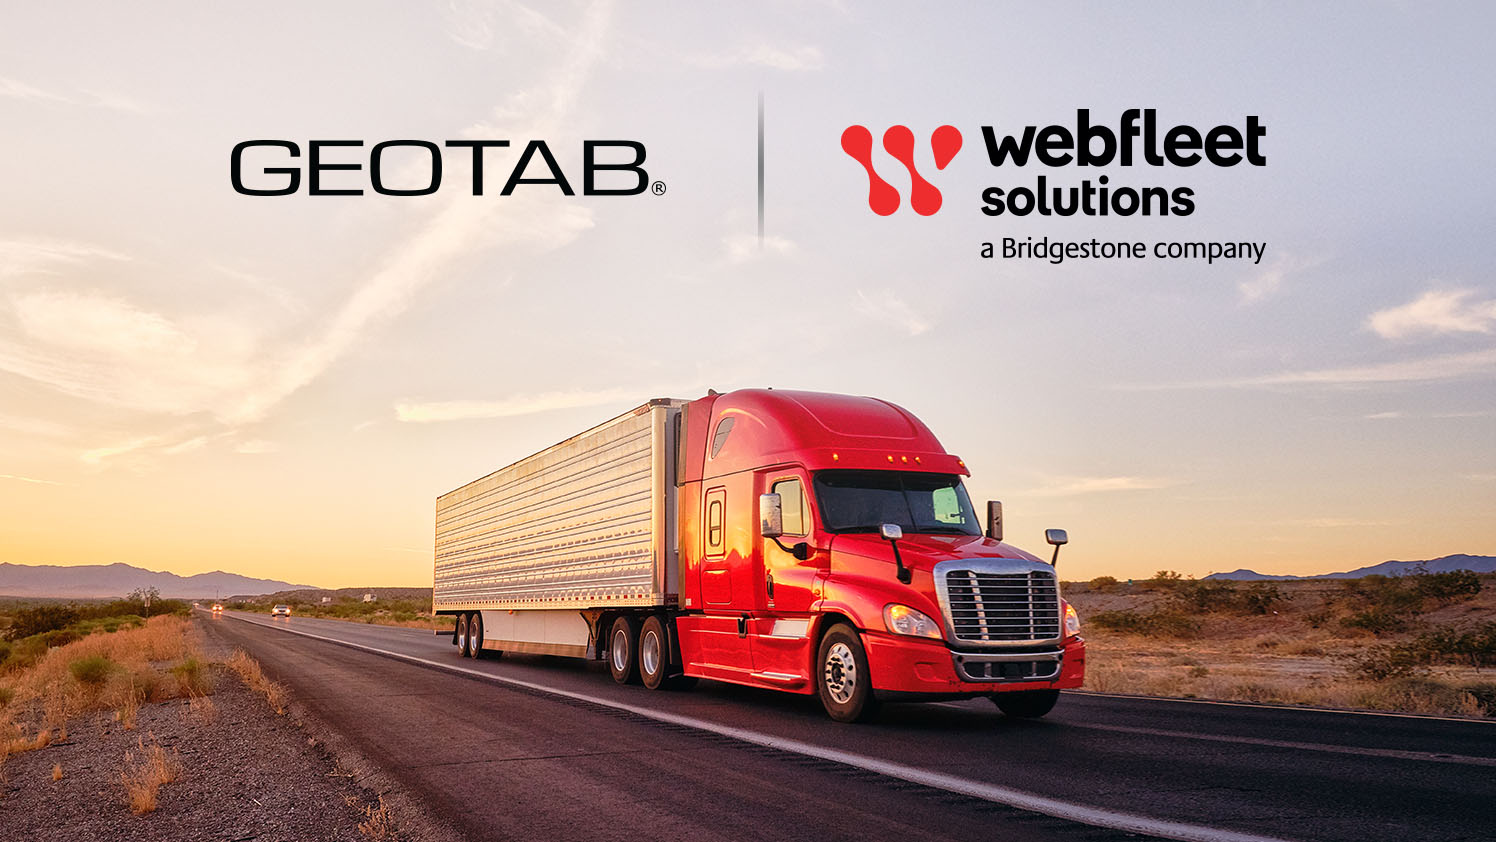 Red truck driving on highway with Geotab logo and Webfleet solutions logo in background